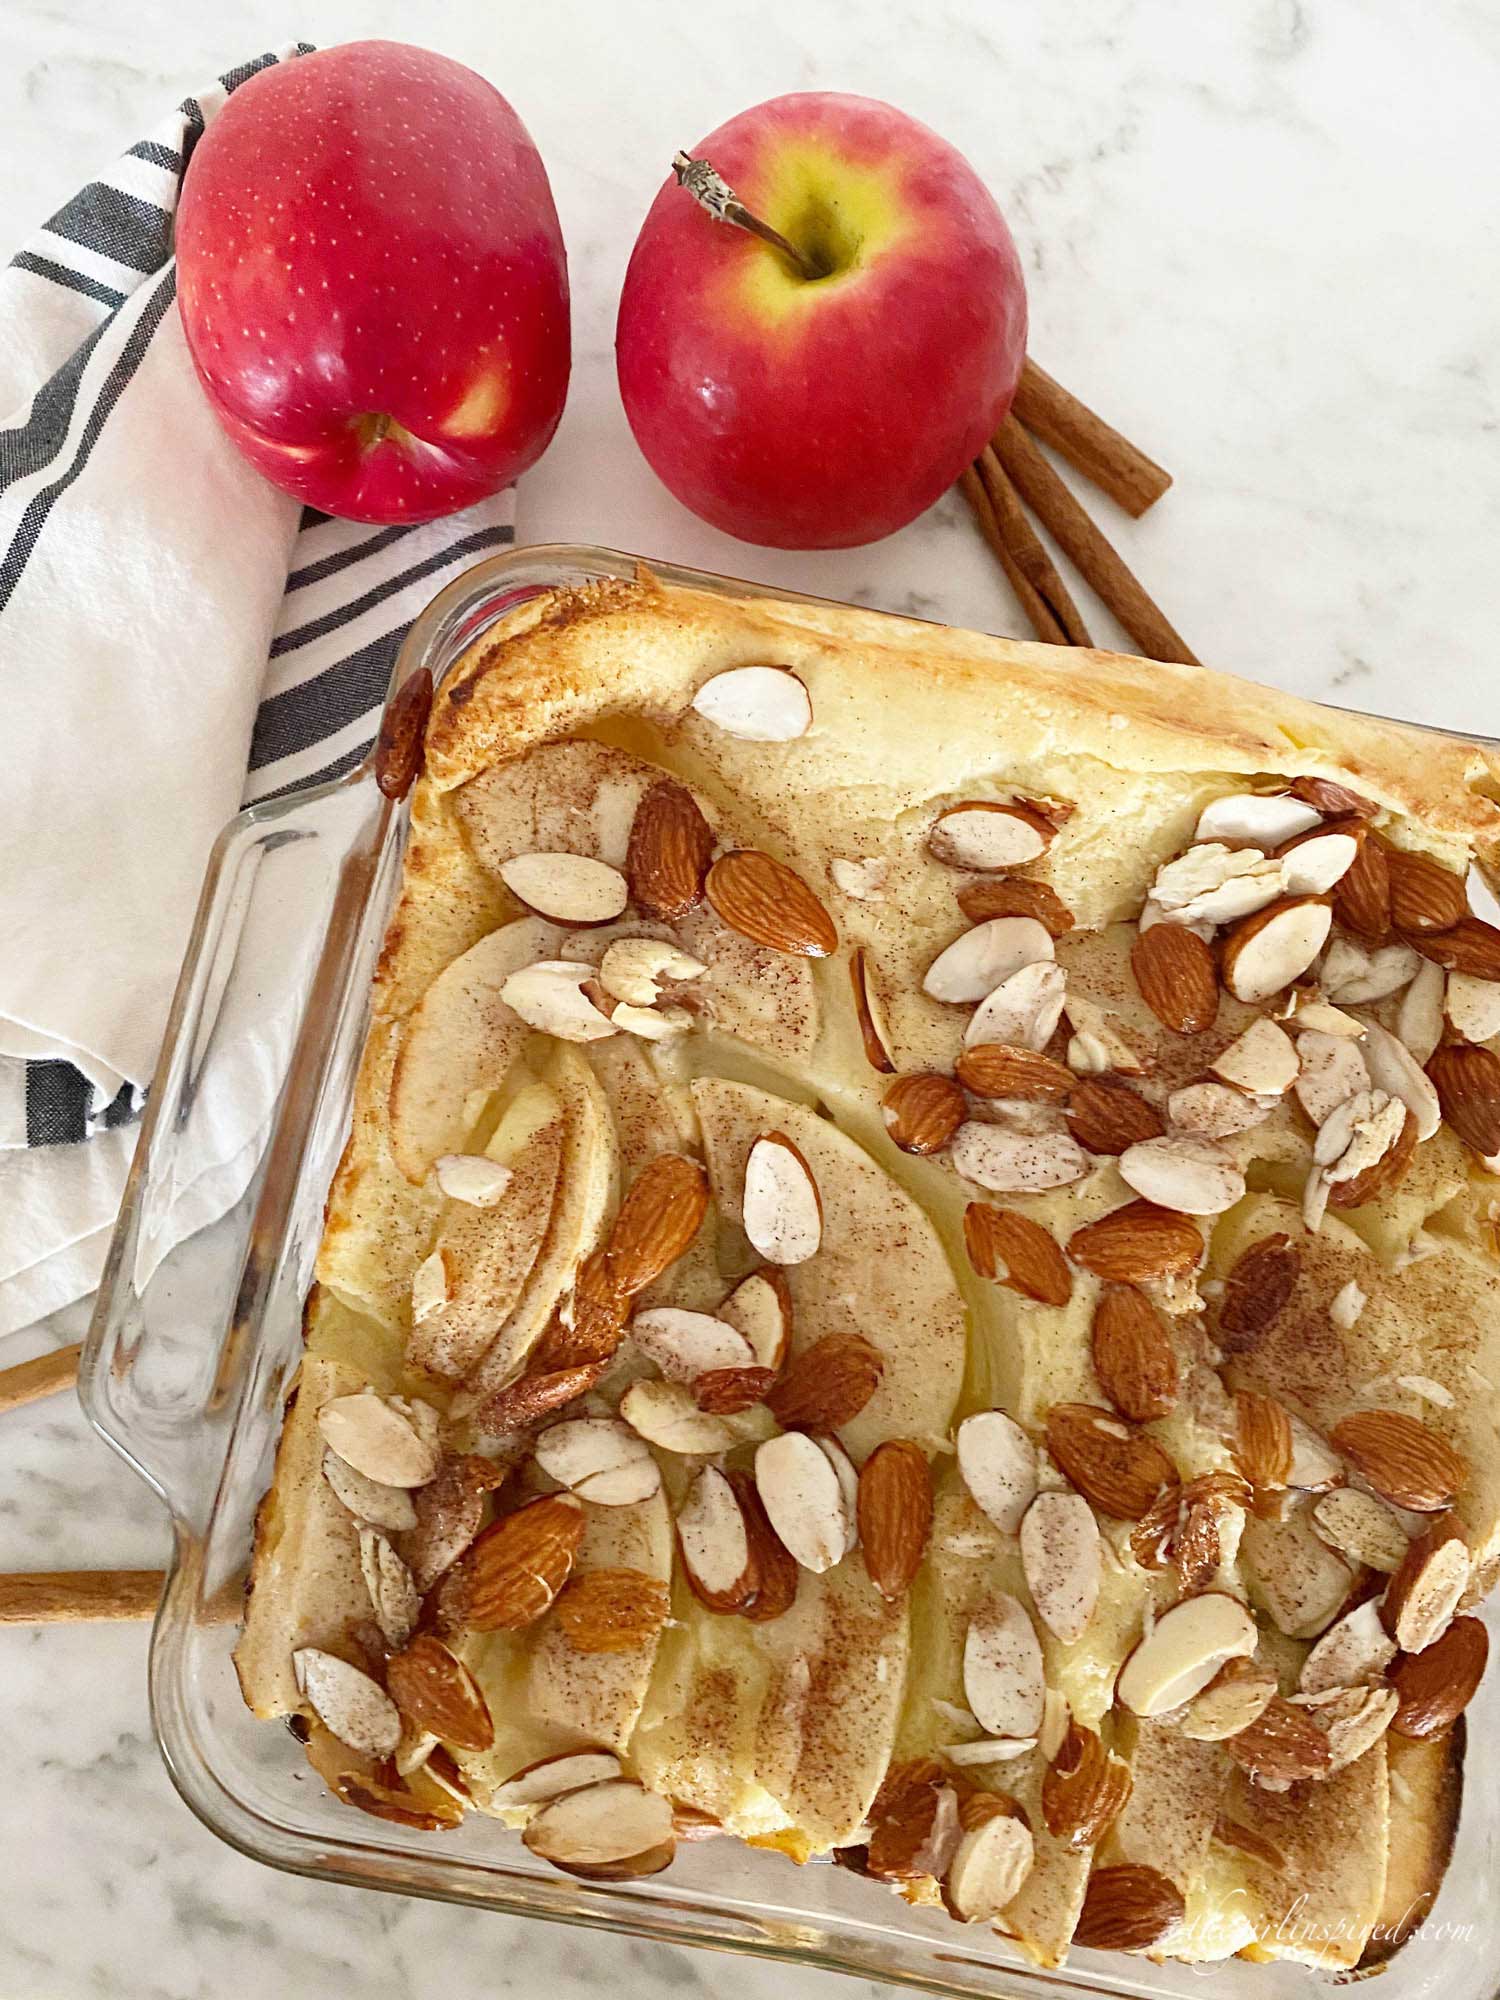 German pancake with red apples, sliced almonds